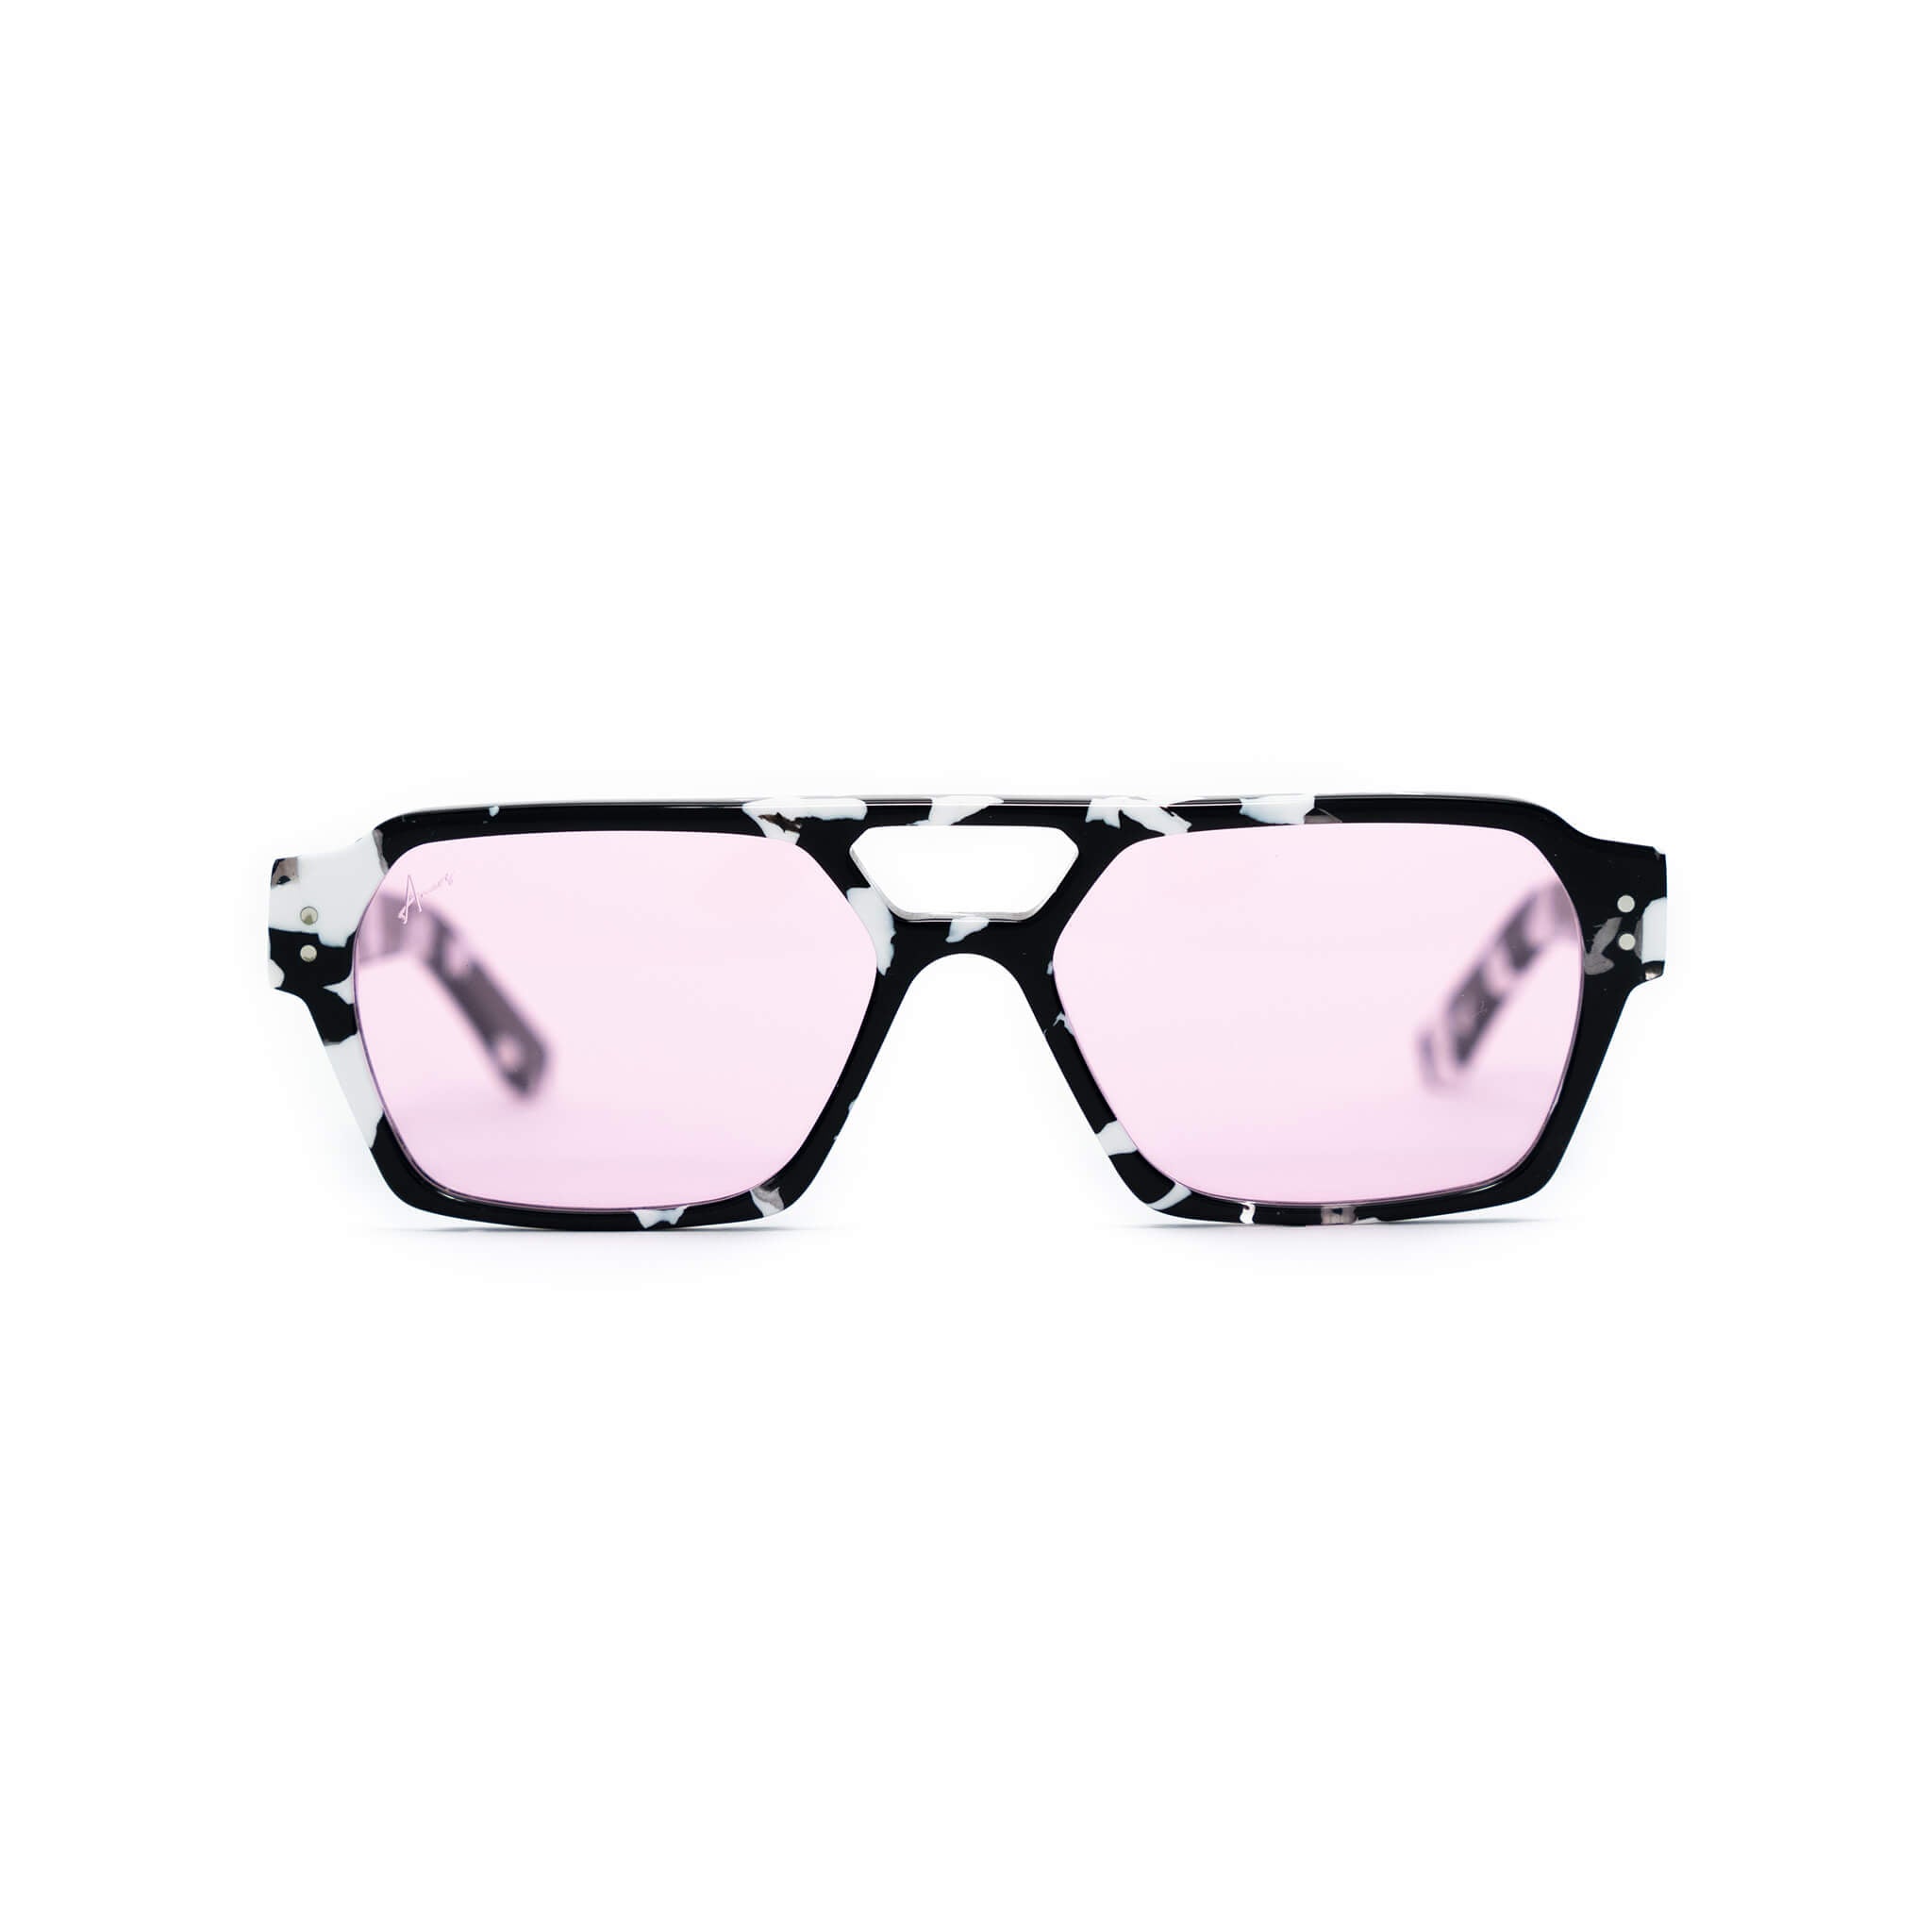 Ego sunglasses from Ameos in black & white and pink